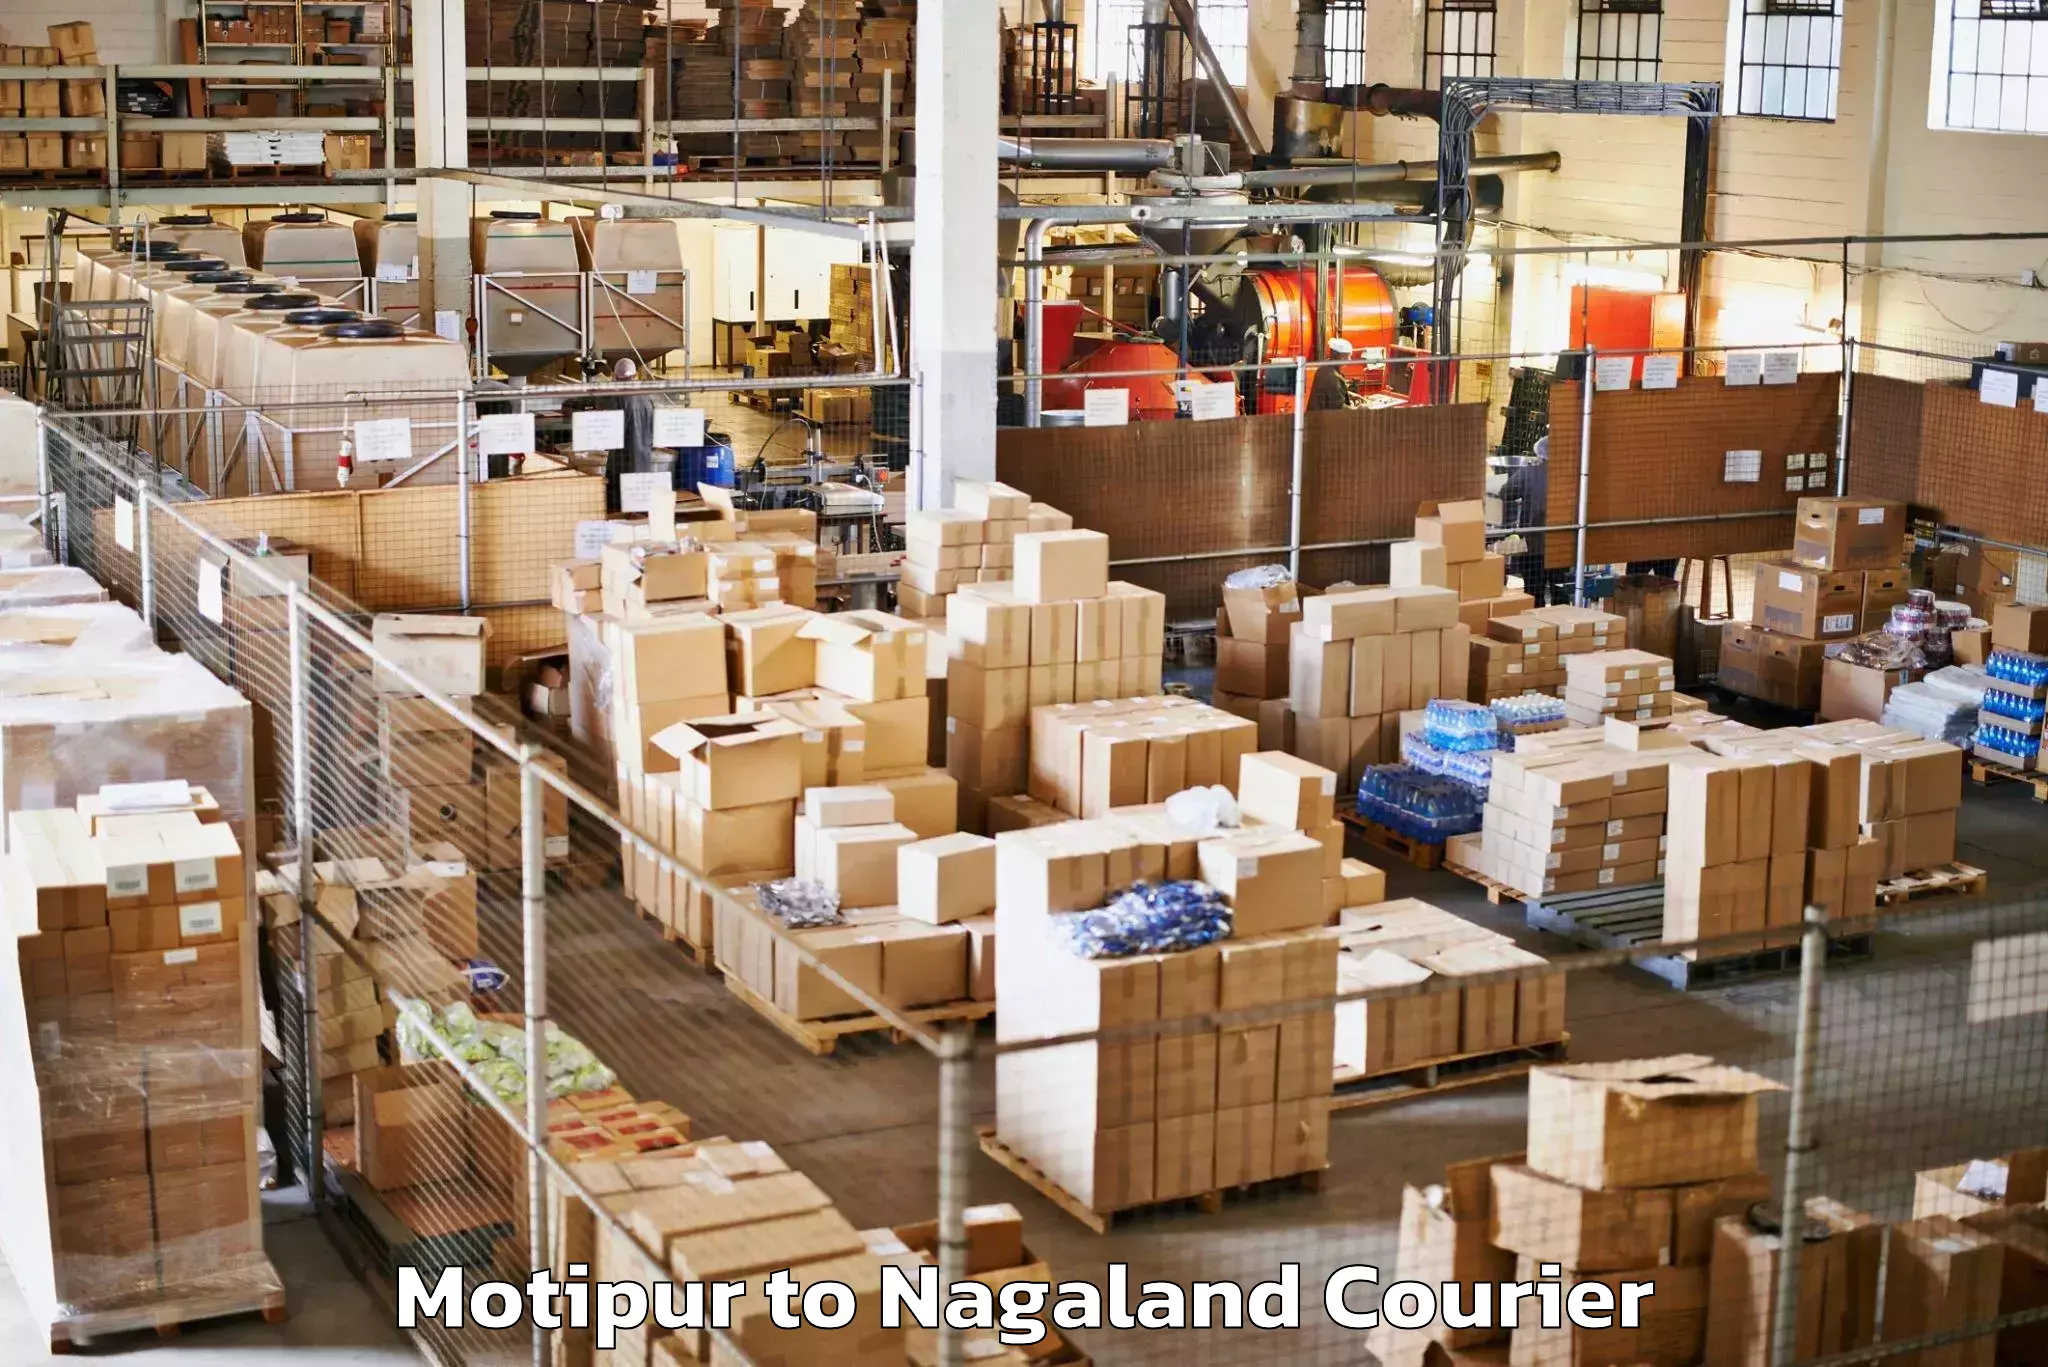 Online luggage shipping booking Motipur to Nagaland